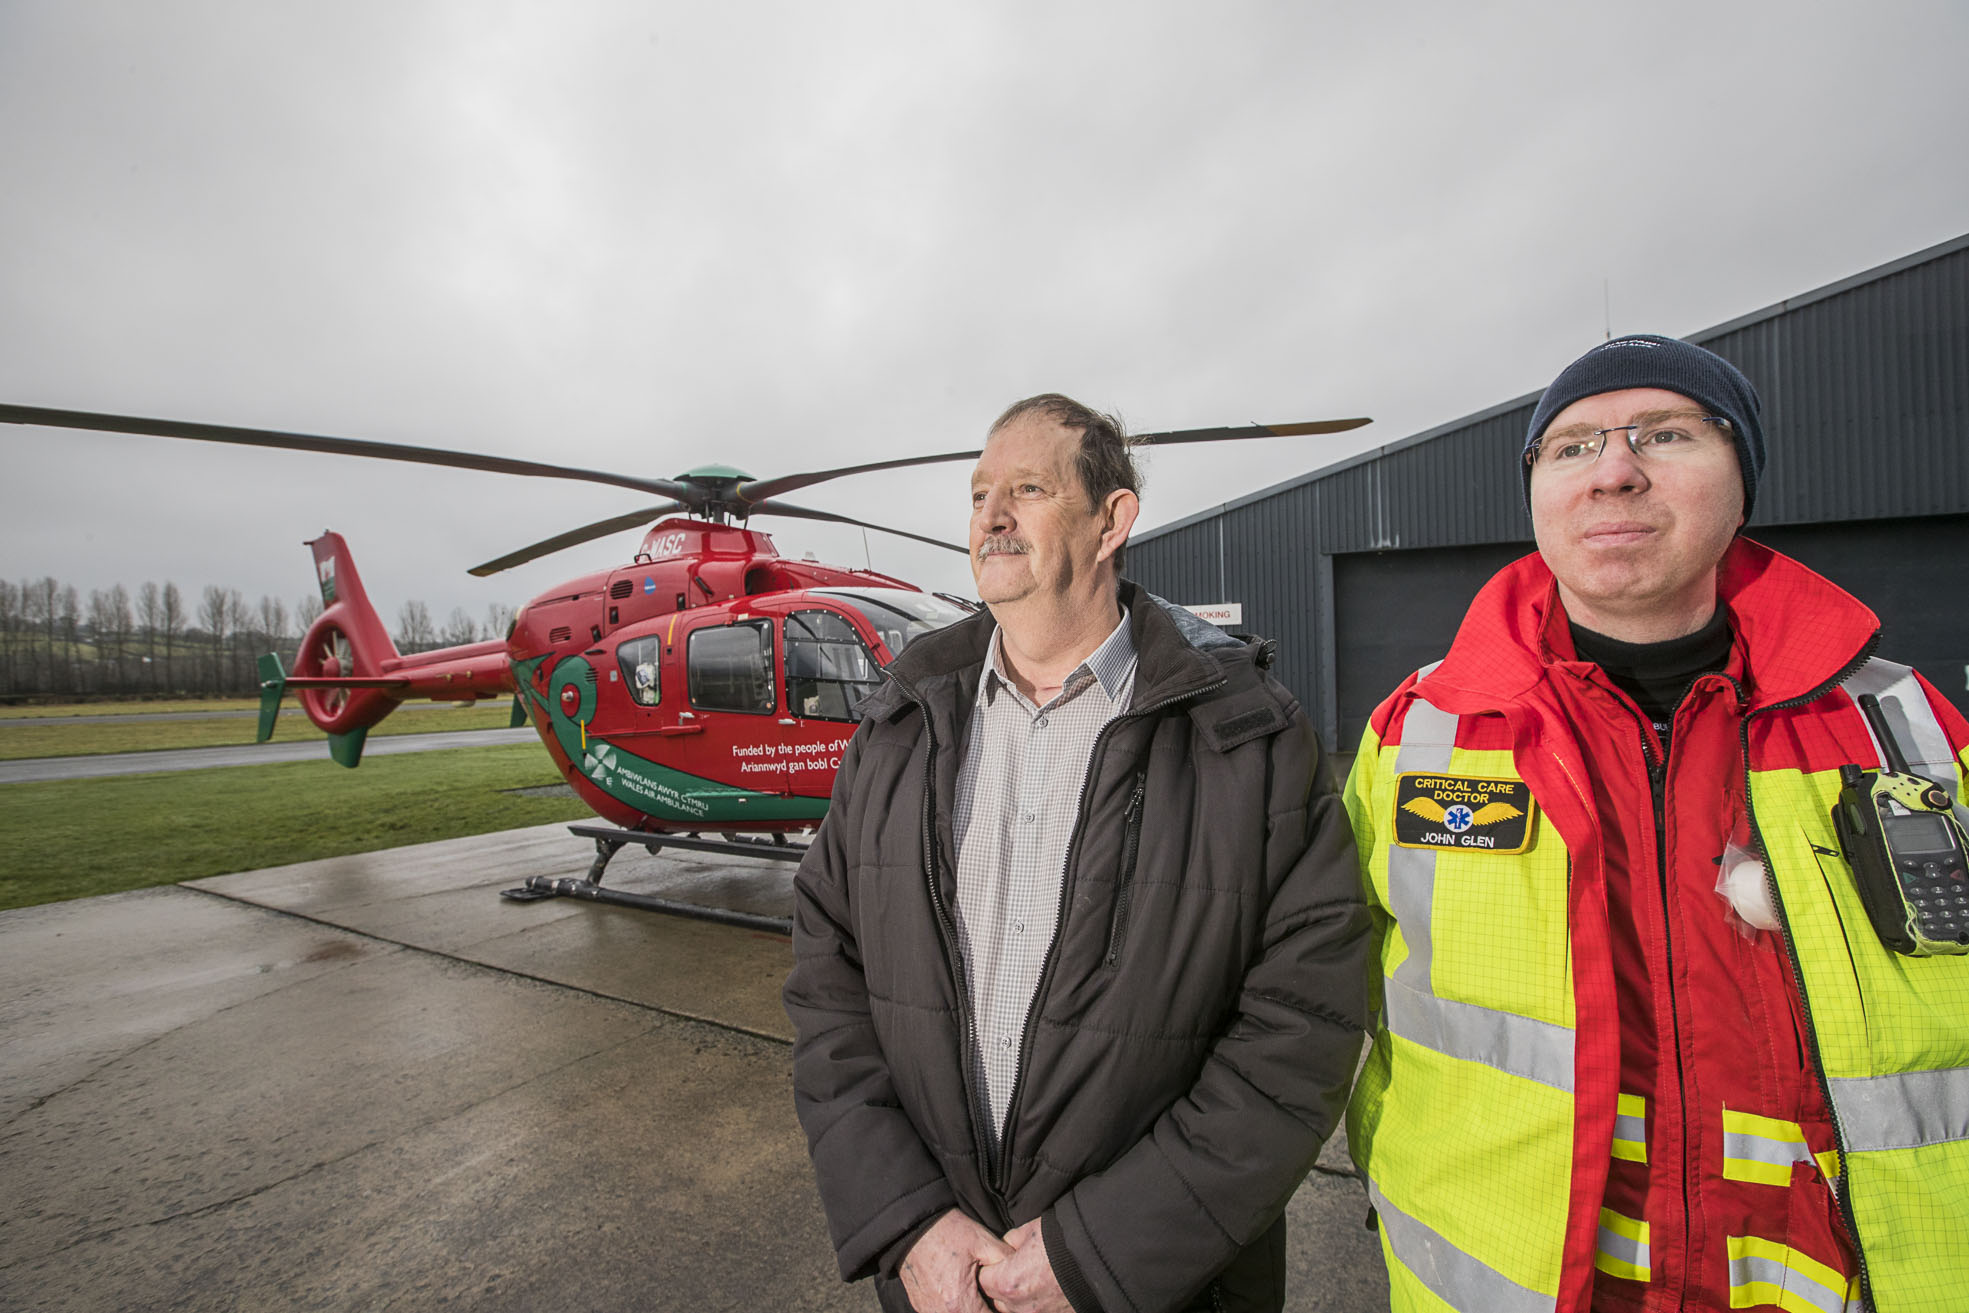 Heart attack survivor thanks flying medic who brought him back from brink of death